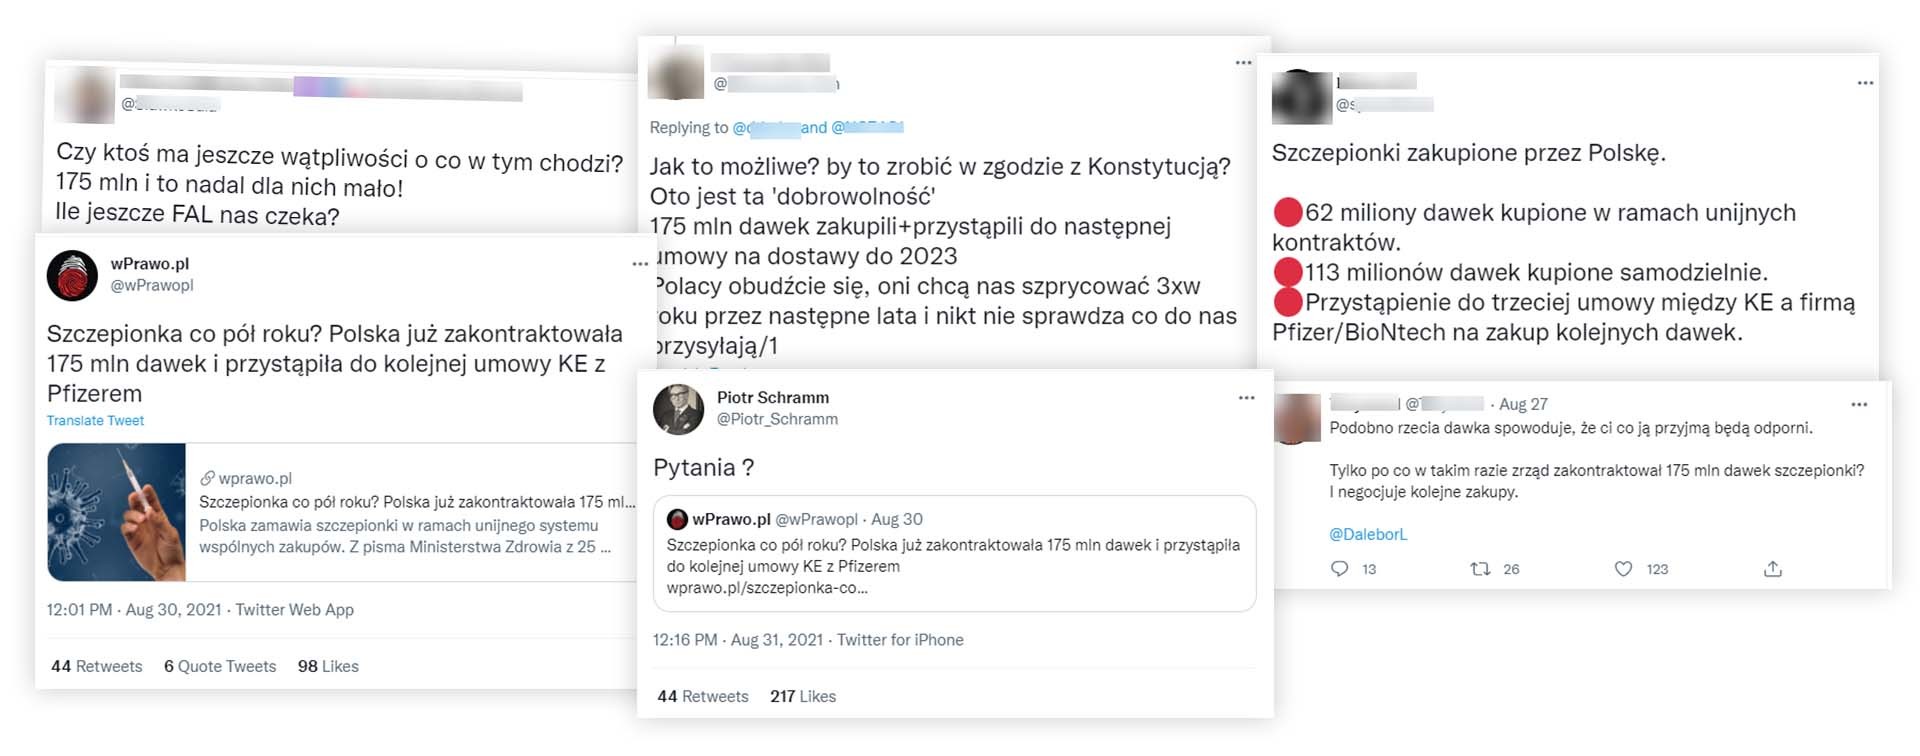 Information about Poland's alleged purchase of 175 million doses of the vaccine is spreading through social media 